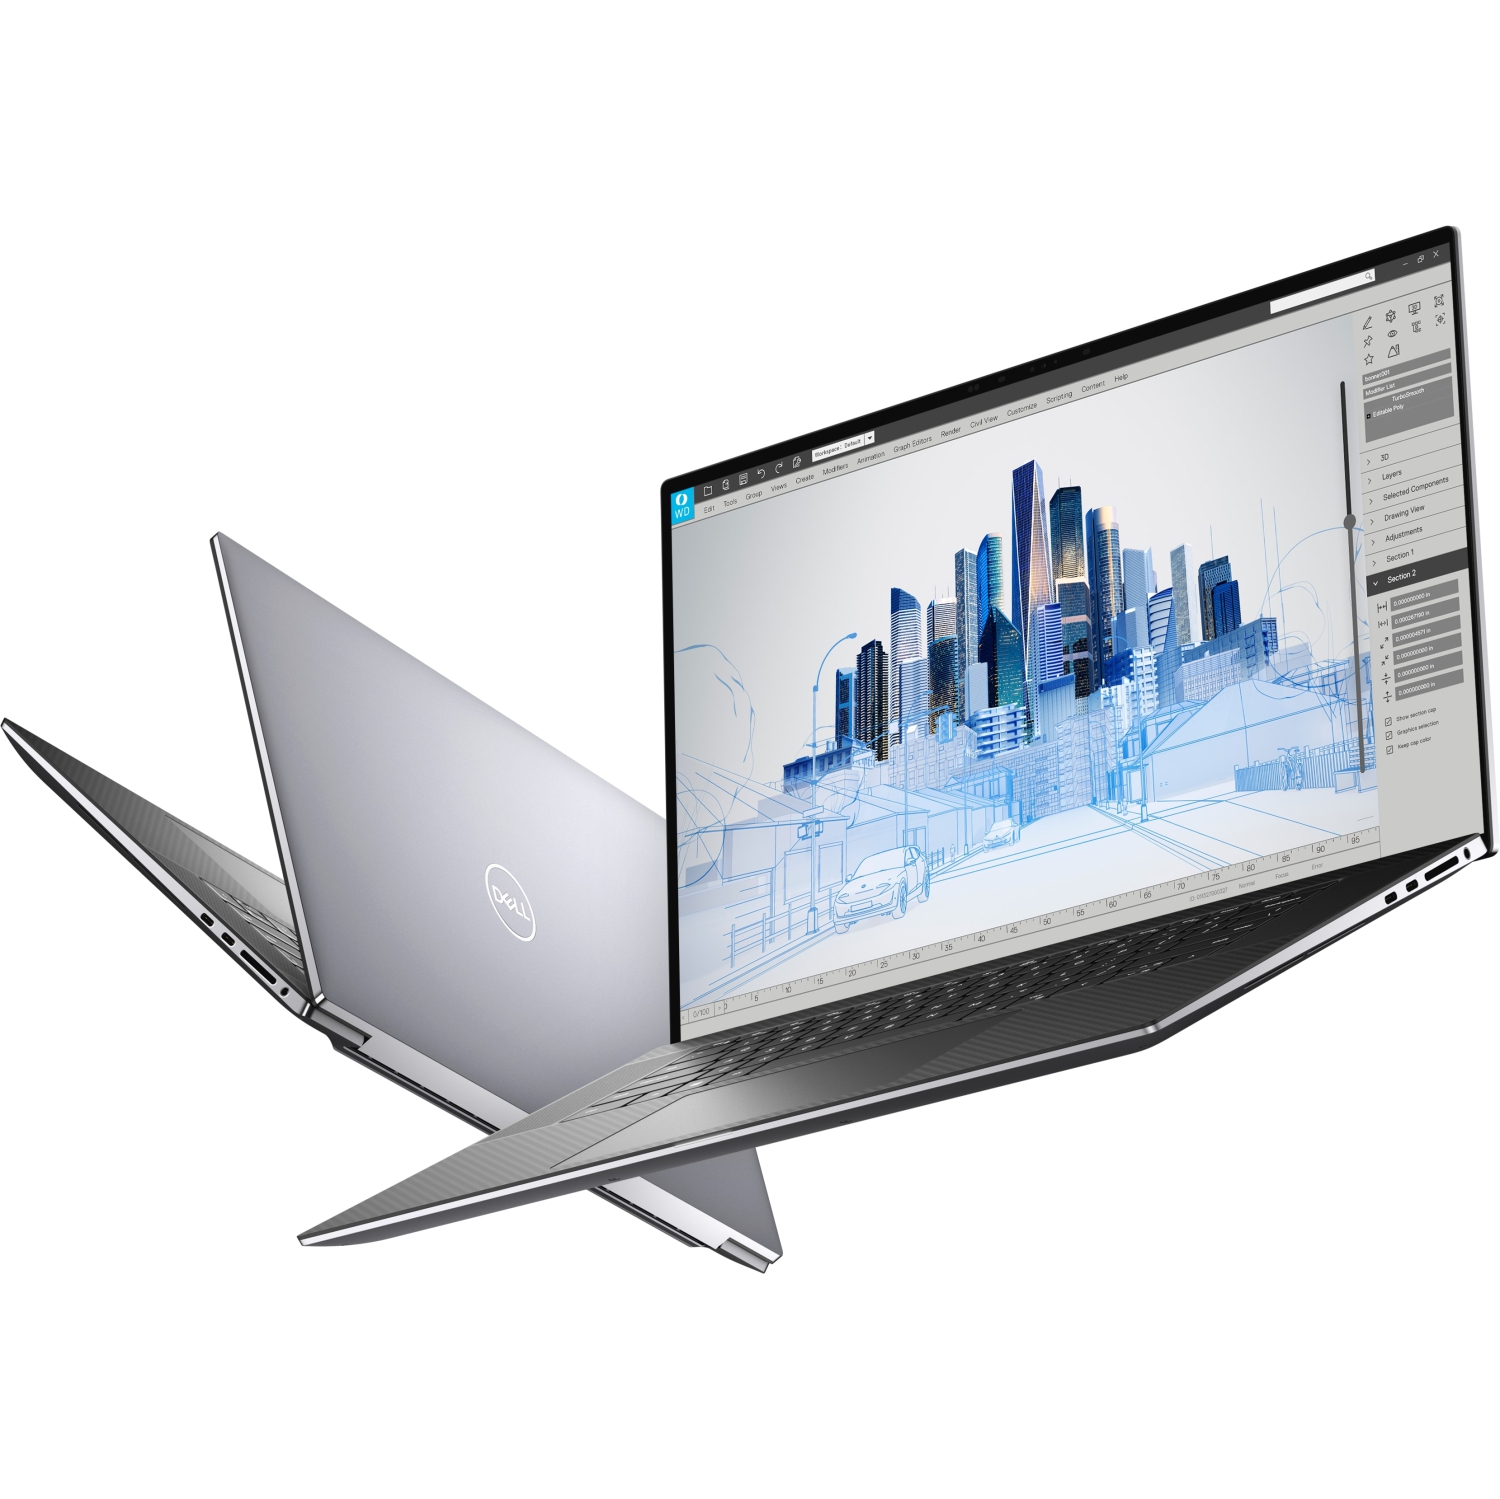 Refurbished (Excellent) - Dell Precision 5000 5760 Workstation Laptop (2021), 17" 4K Touch, Core Xeon W, 512GB SSD, 8GB RAM, RTX A3000, 4.9 GHz, 11th Gen CPU Certified